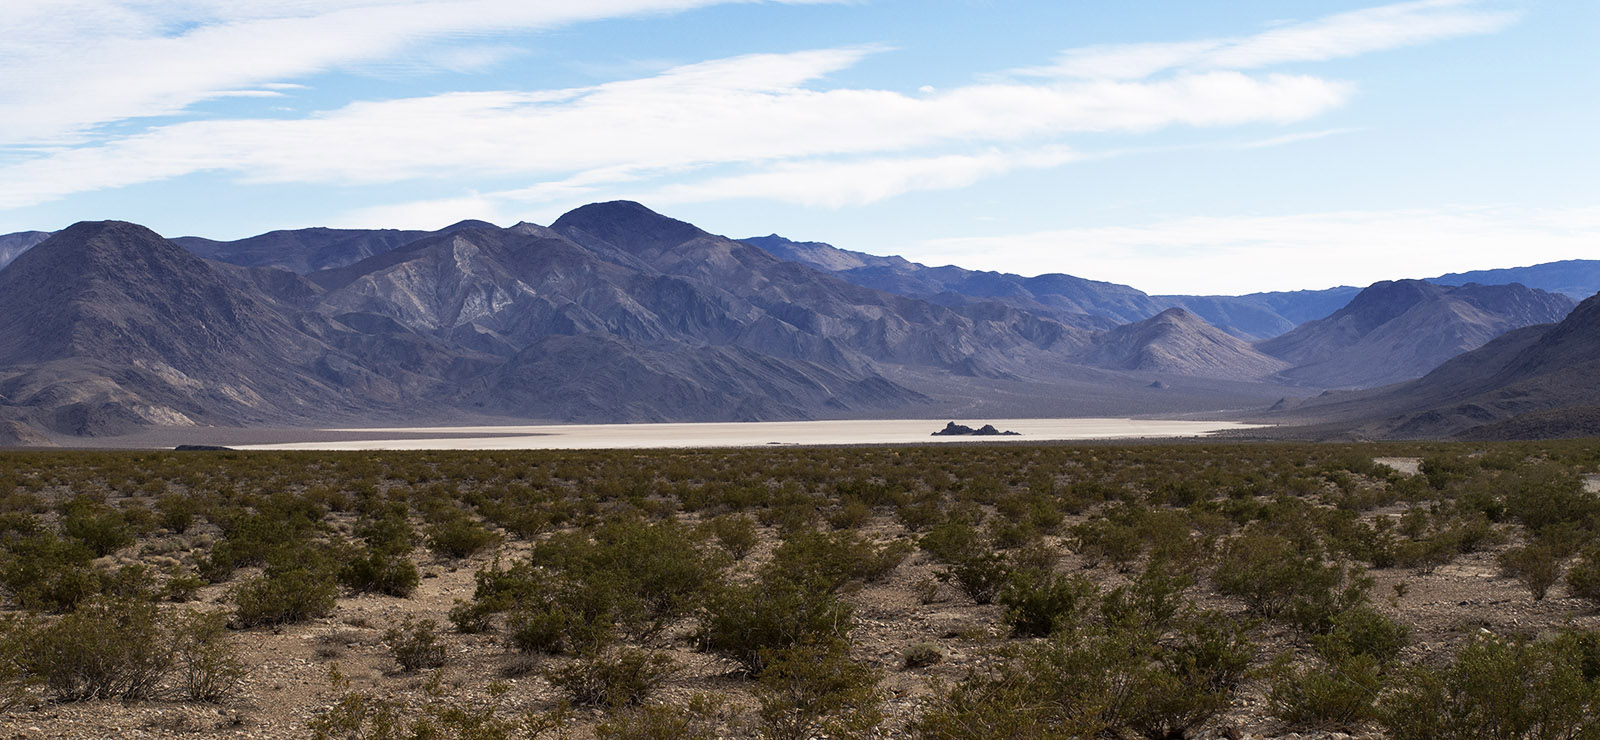 Racetrack Playa with the grandstand in the middle in the distance.